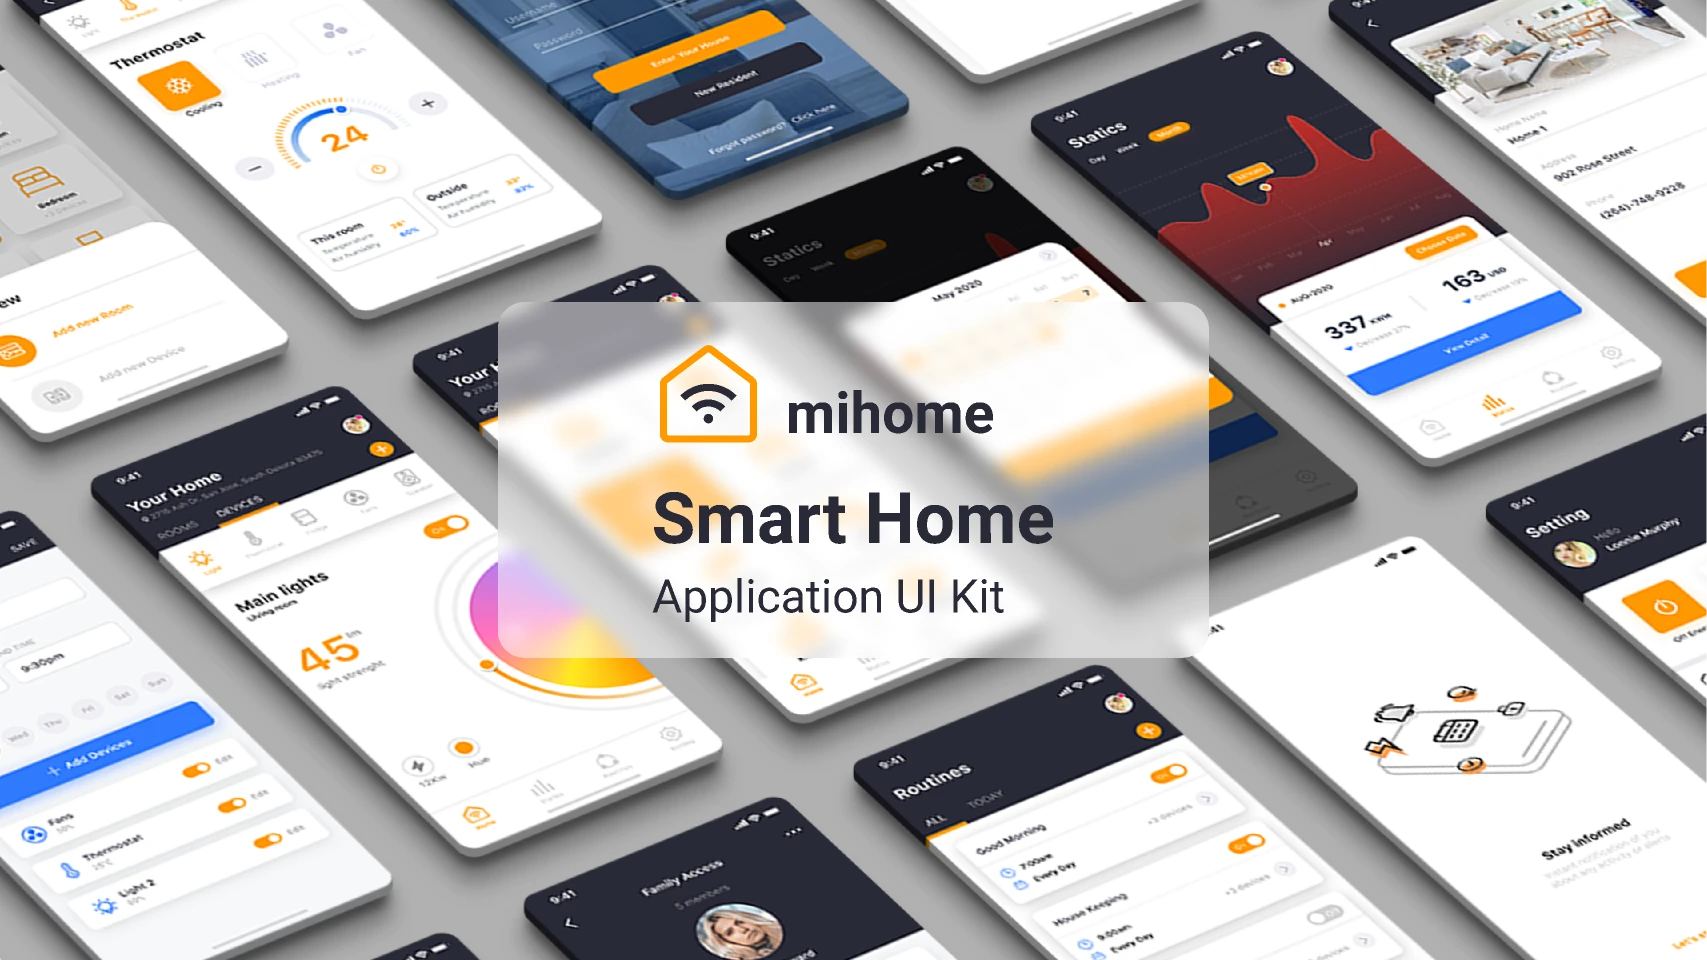 App/smart home/exercise for Figma and Adobe XD